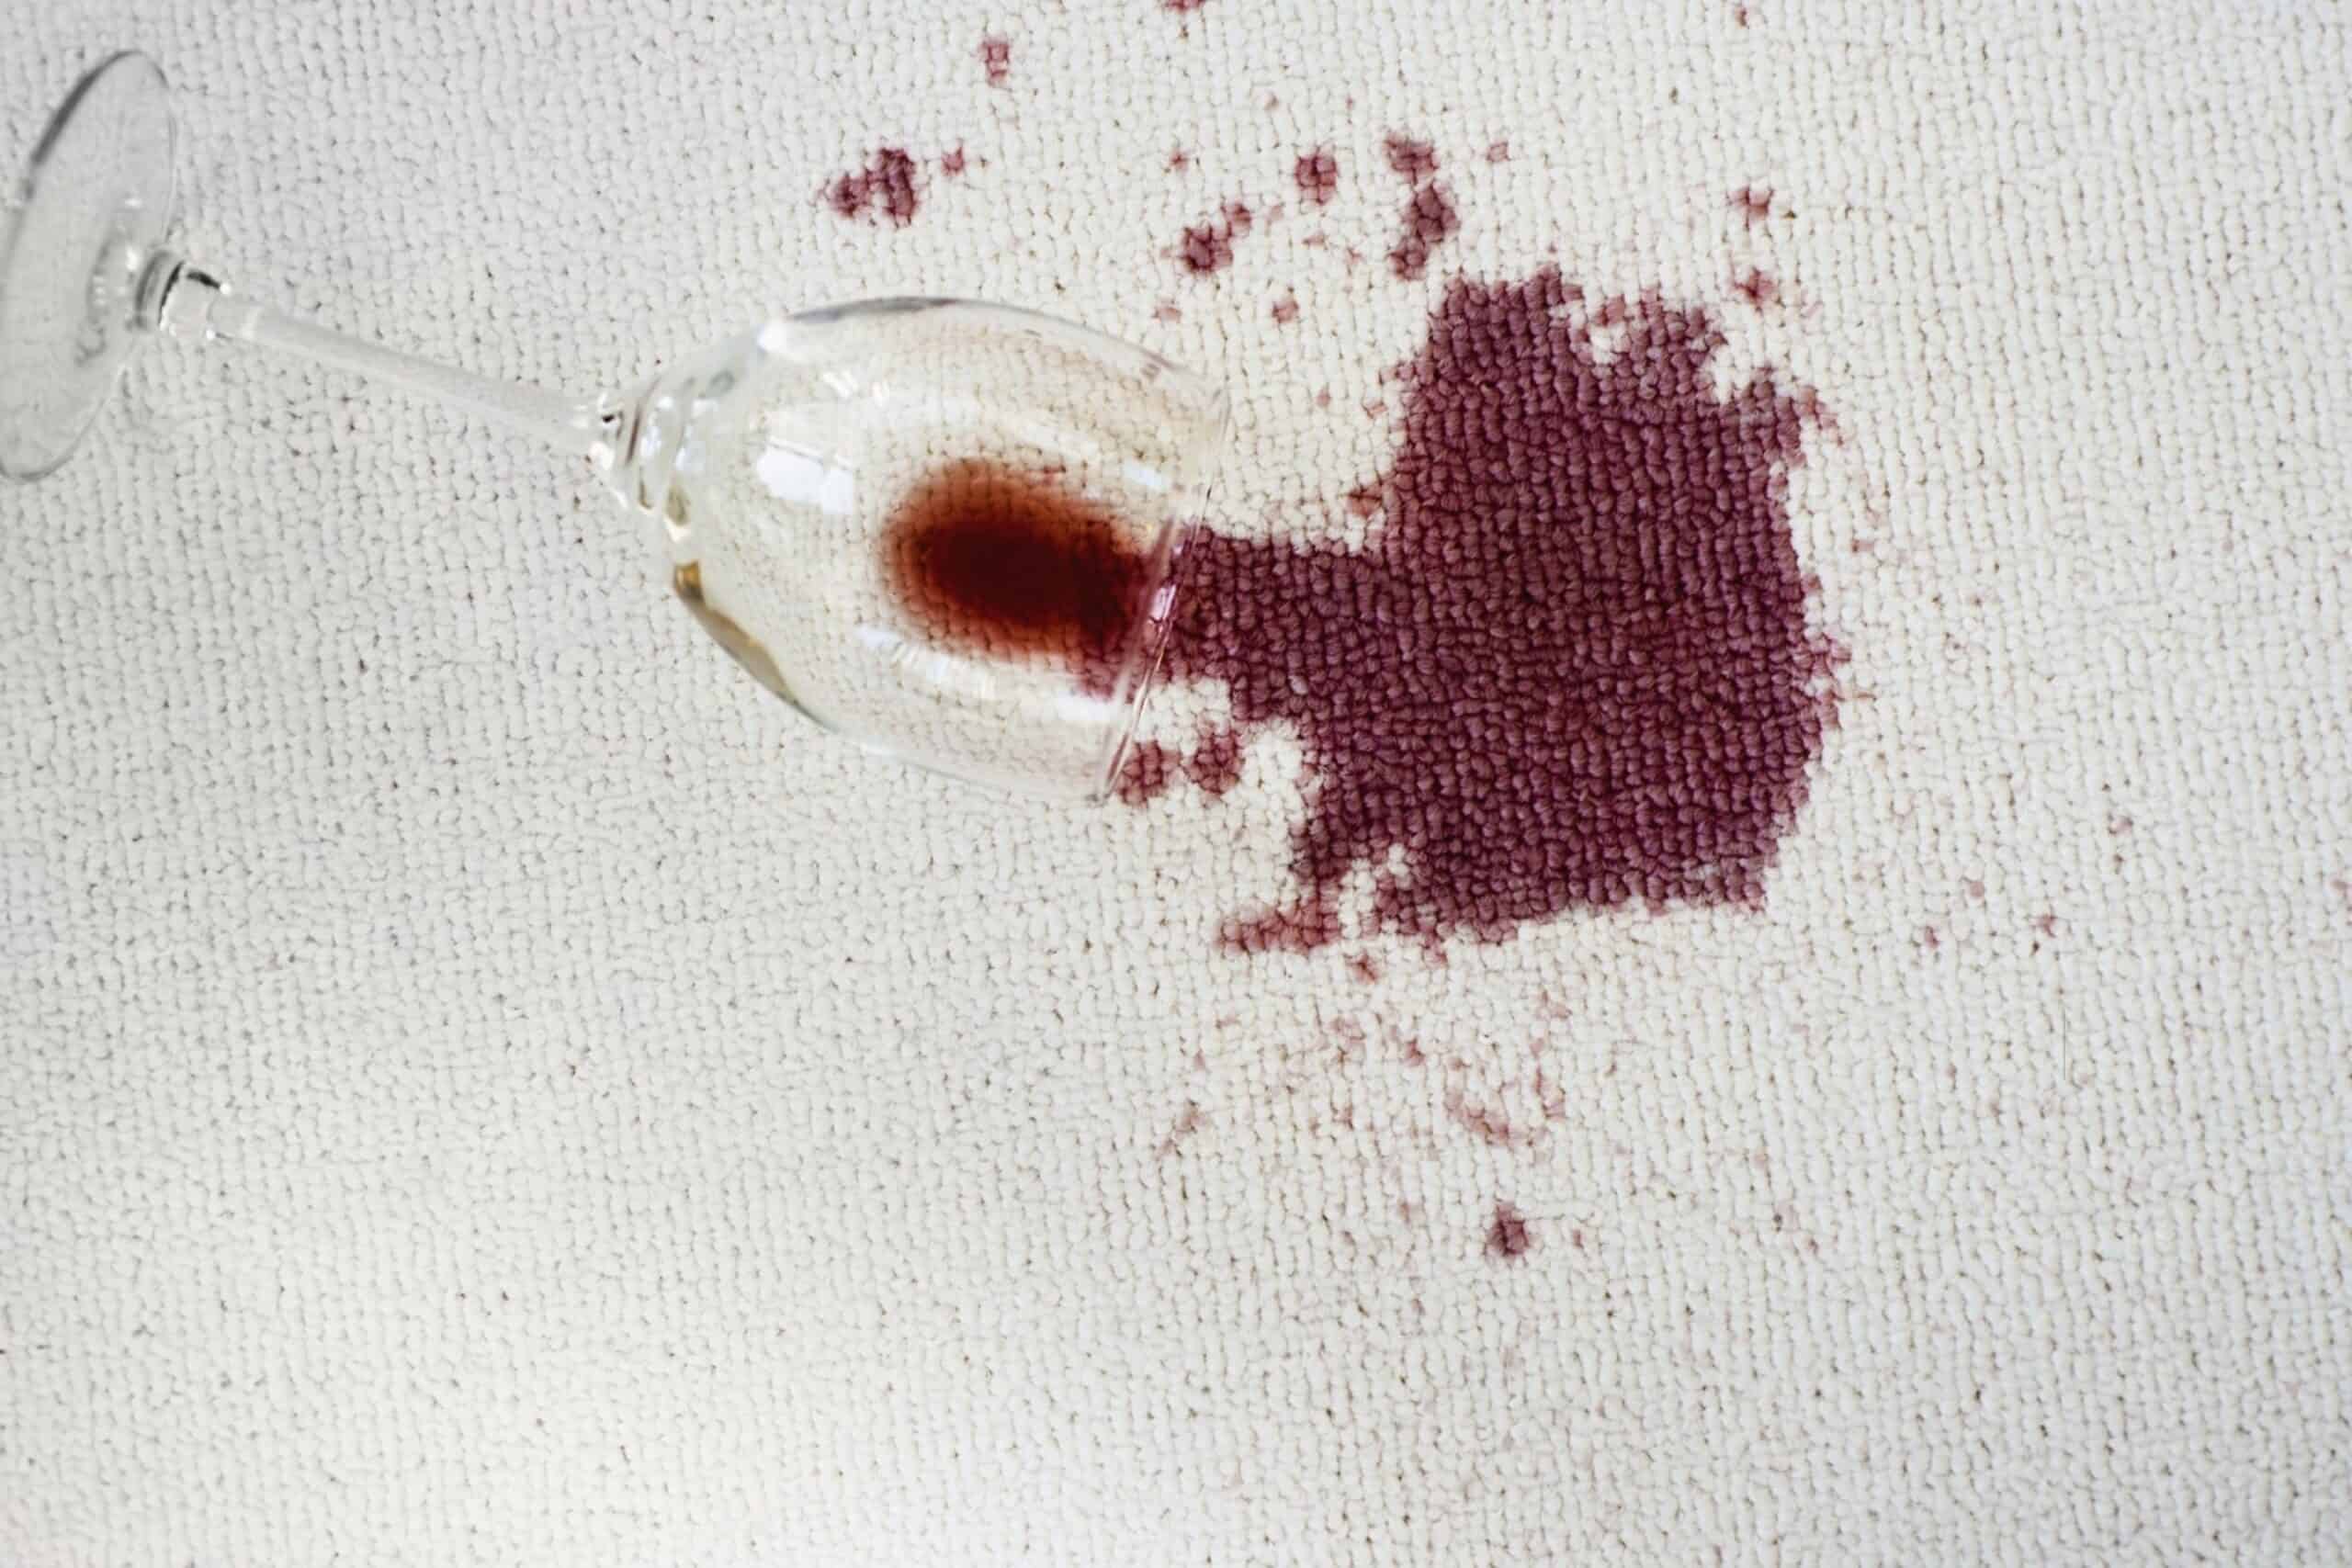 How to Clean Your Carpet Like a Pro Tidyhere Image of a Spilled Red Wine in the Carpet